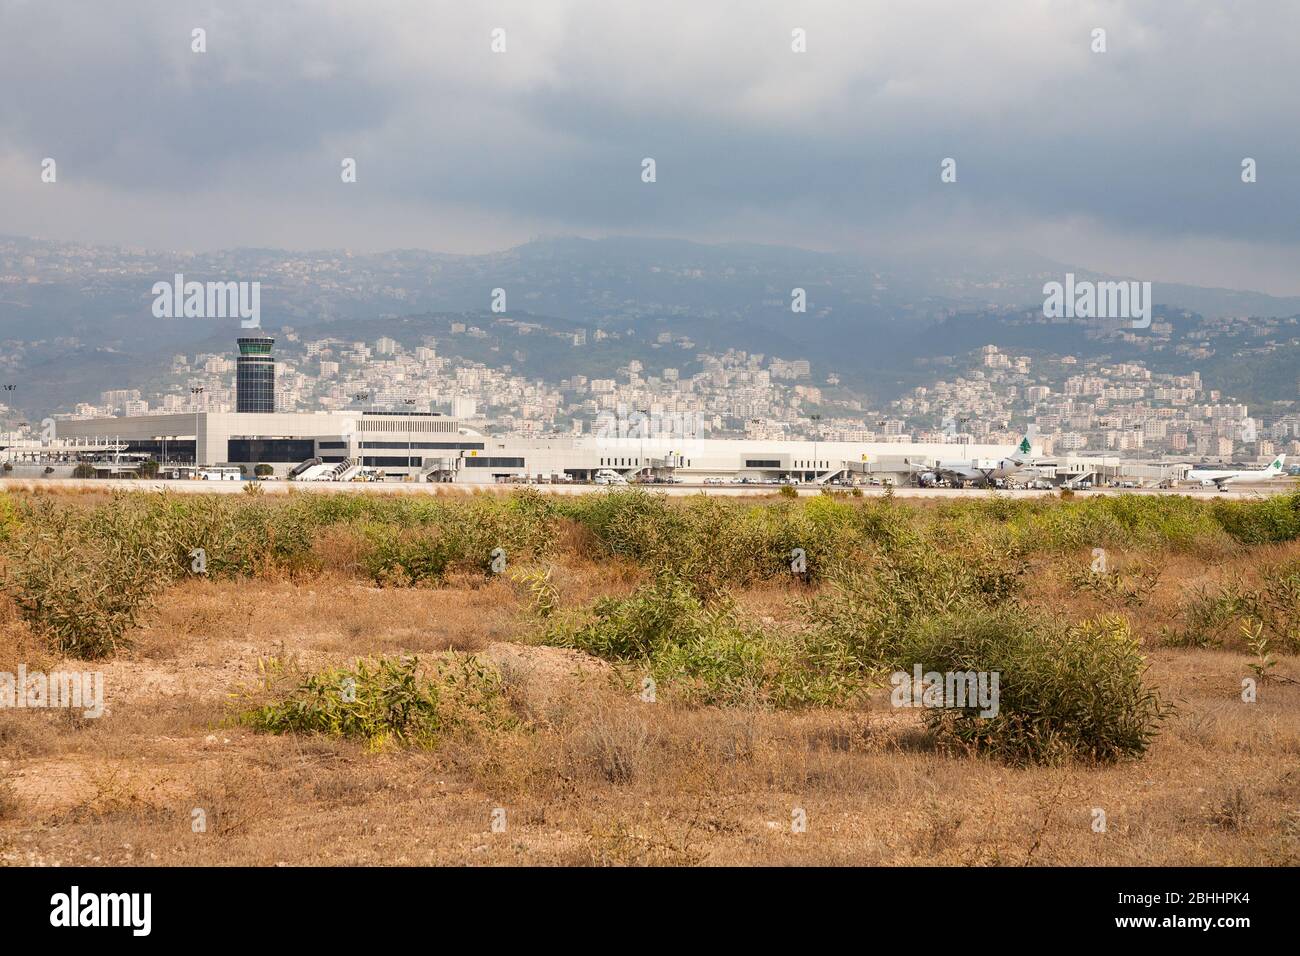 August 01, 2007: An overview of Beirut's Rafic Hariri Internation Airport (BEY), taken from airside and showing the Lebanese mountain range in the bac Stock Photo